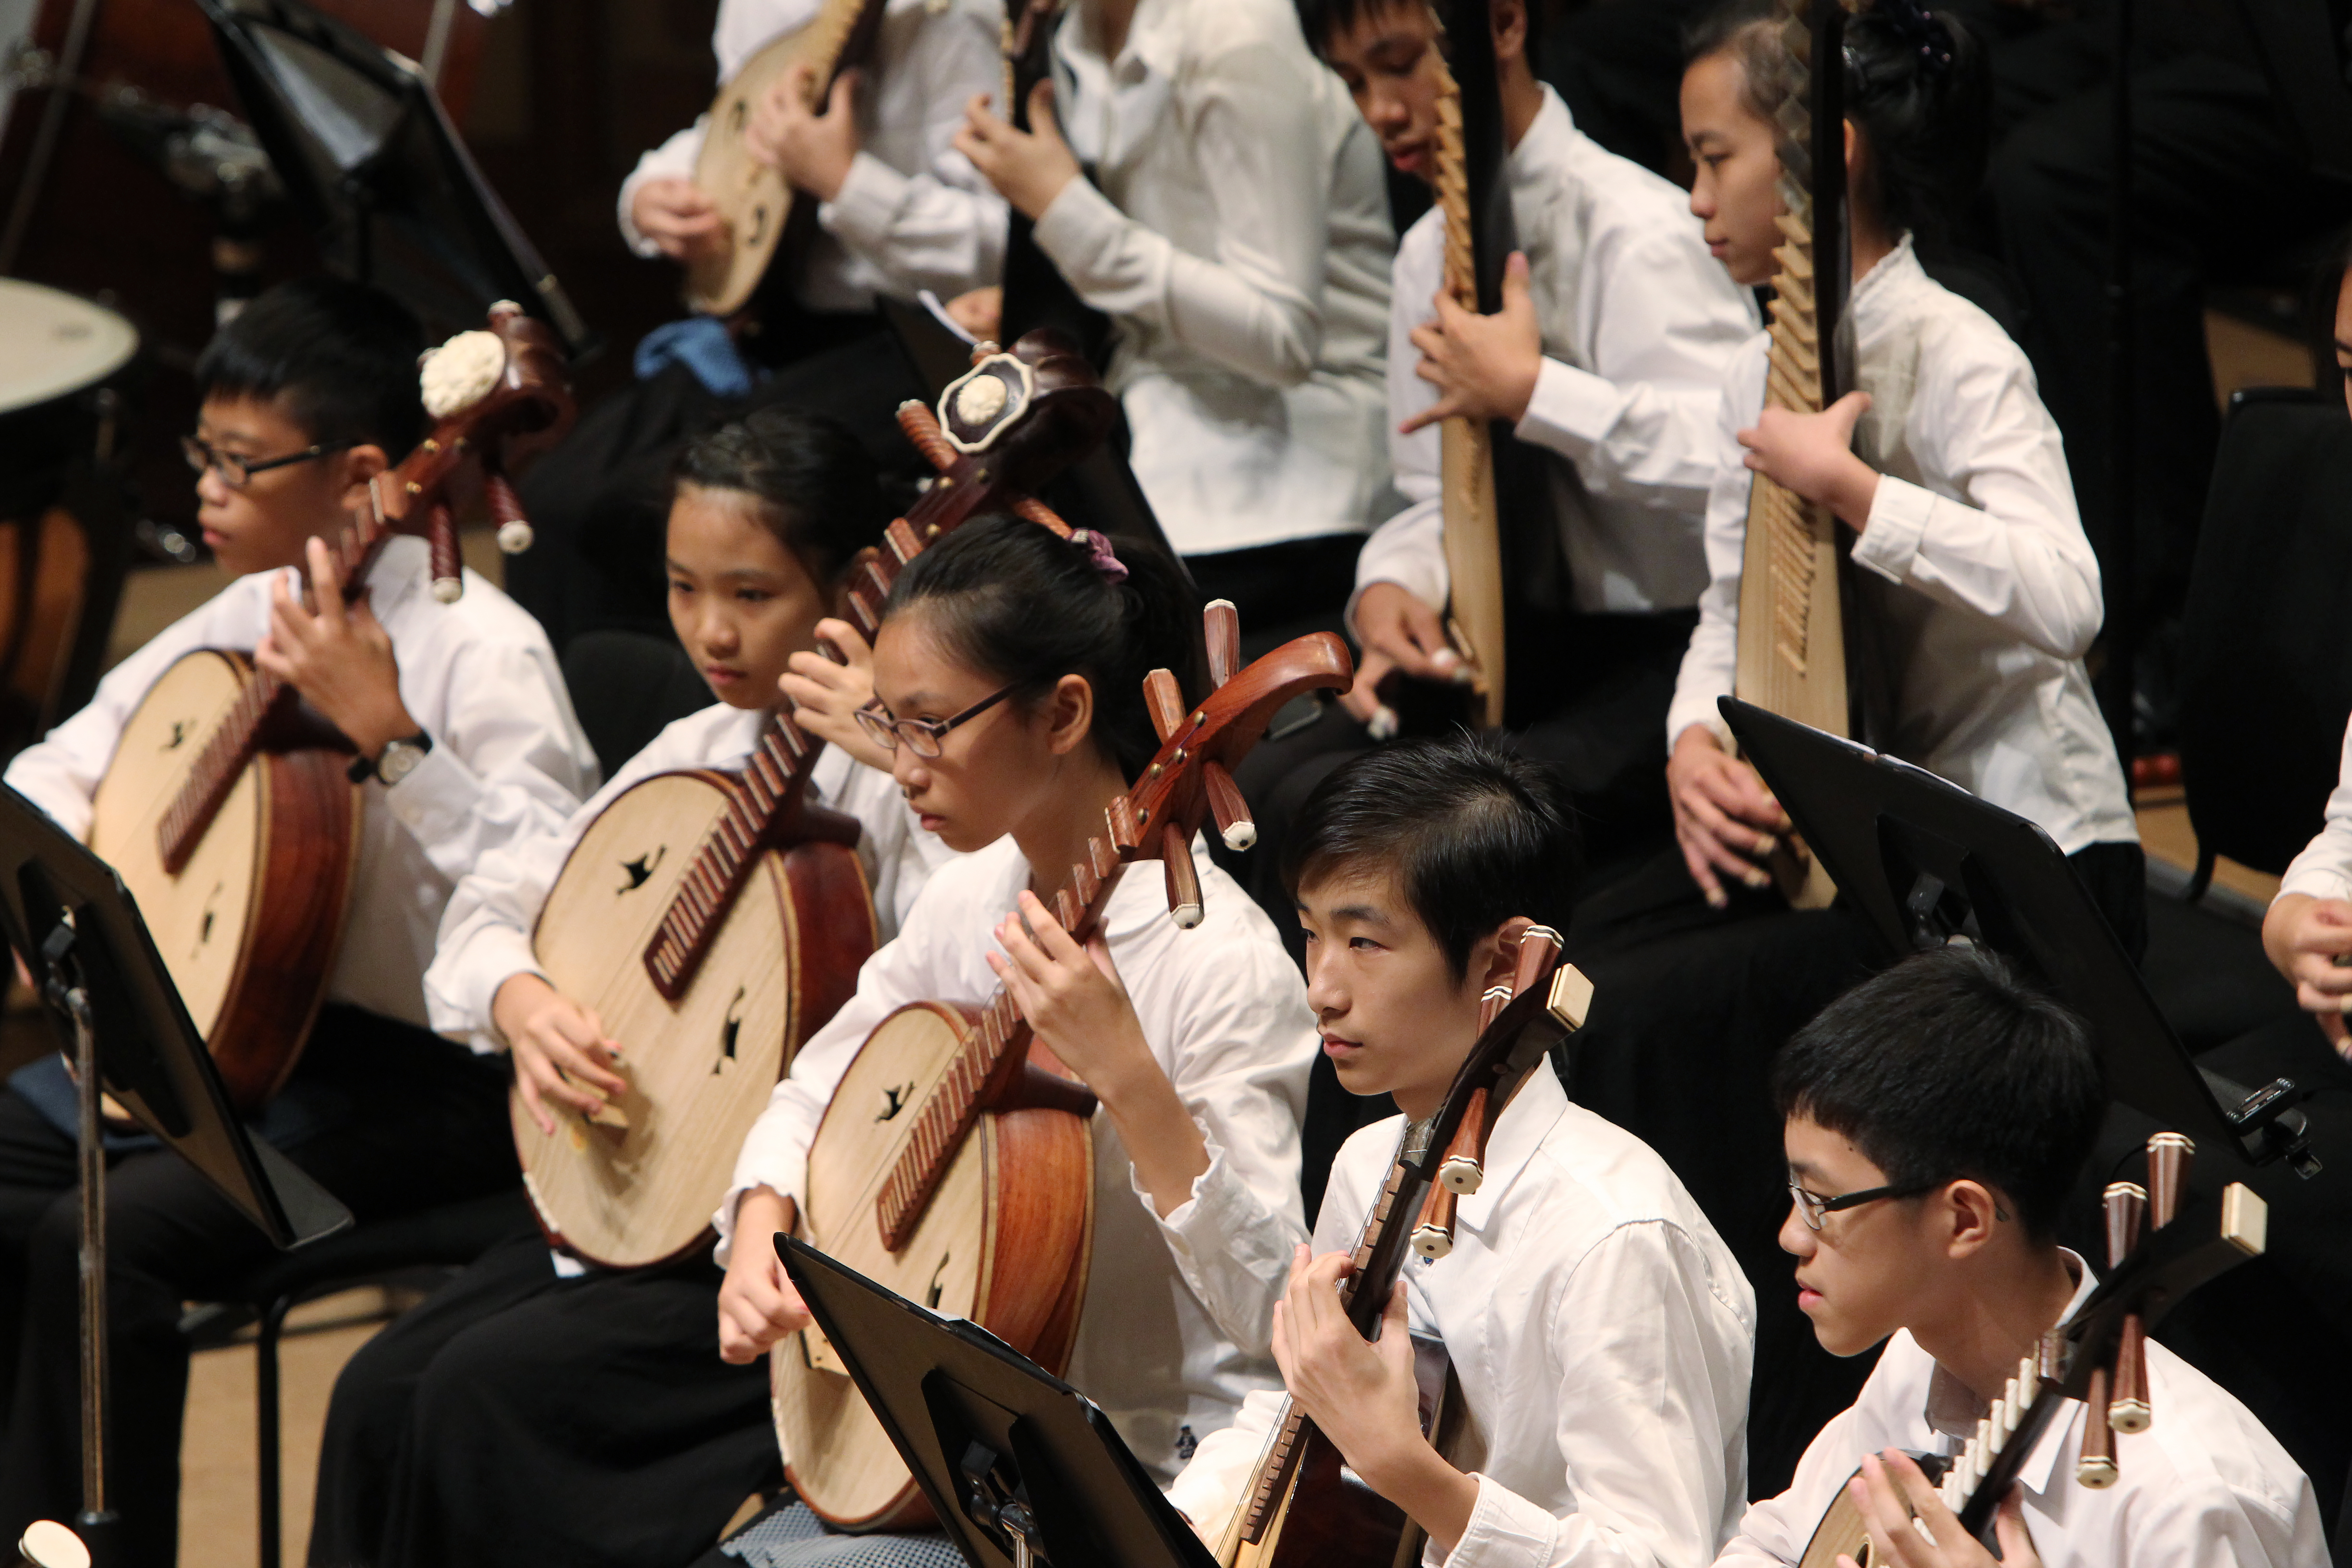 How do you get children to practice their instrument. For kids who are part of an orchestra or band, parents can appeal to their sense of team spirit. 